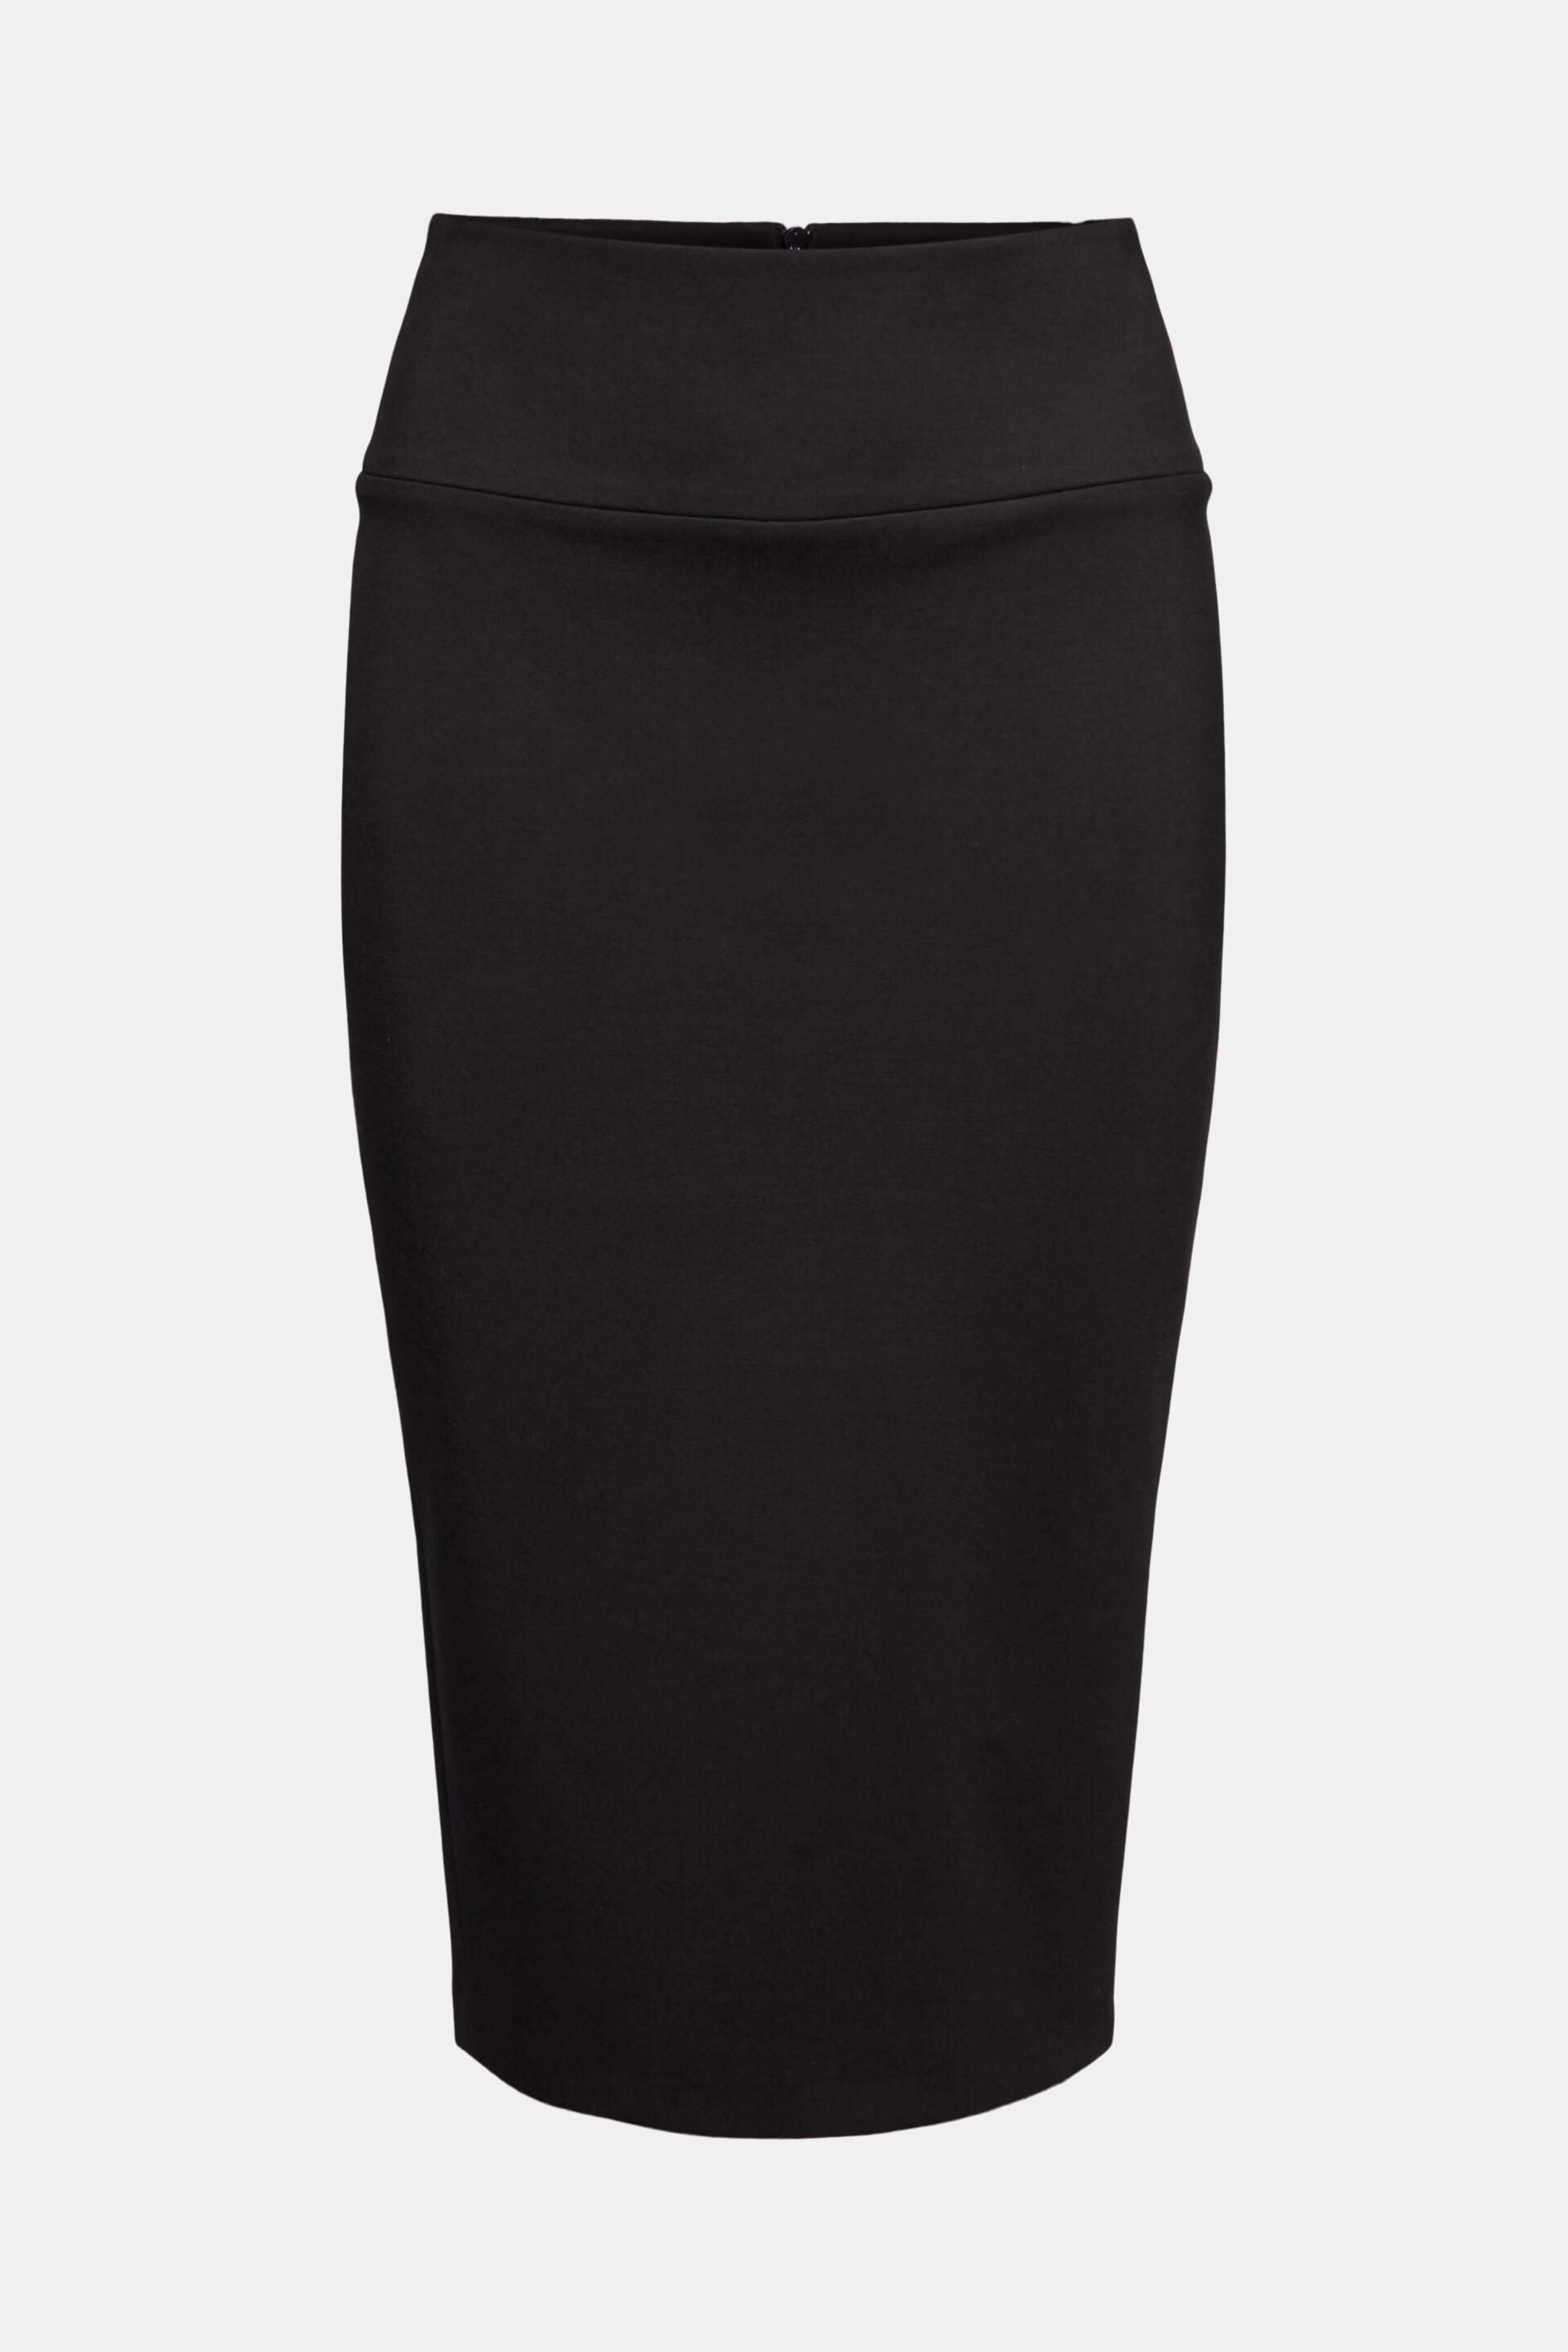 Womens Skirts Esprit Skirts Esprit Collection 081eo1d305 Skirt in Black 